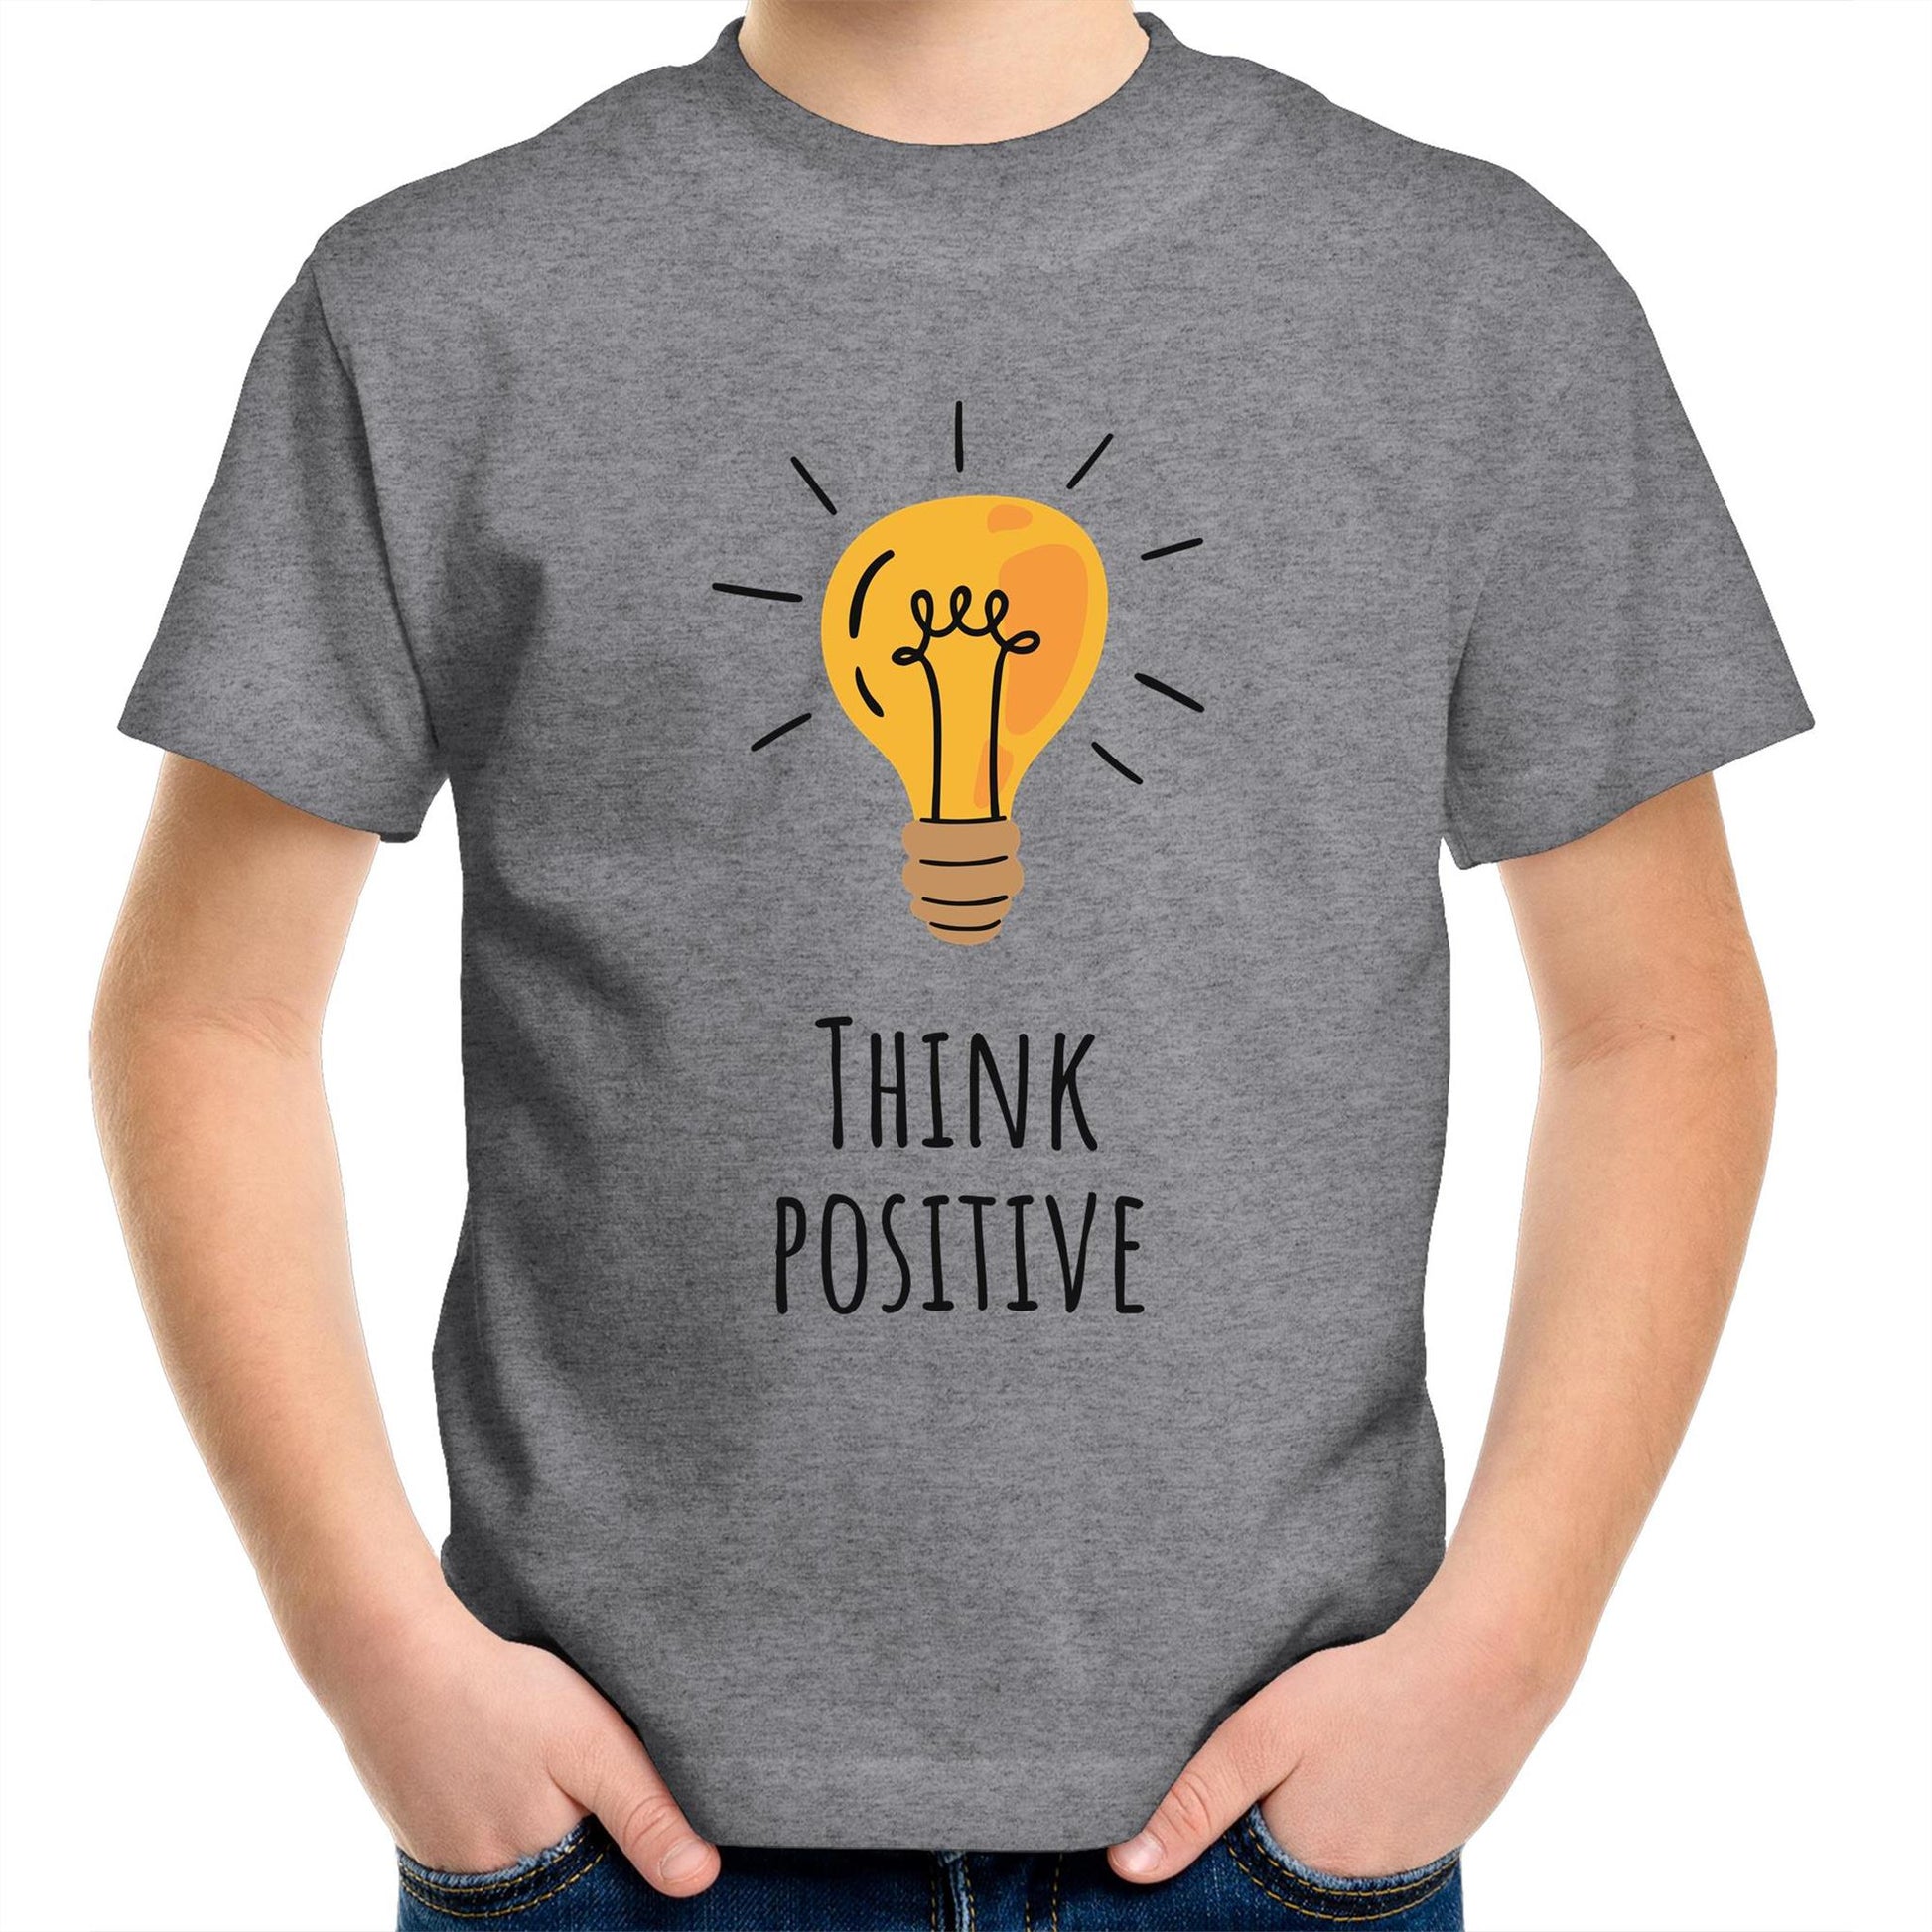 Think Positive - Kids Youth Crew T-Shirt Grey Marle Kids Youth T-shirt